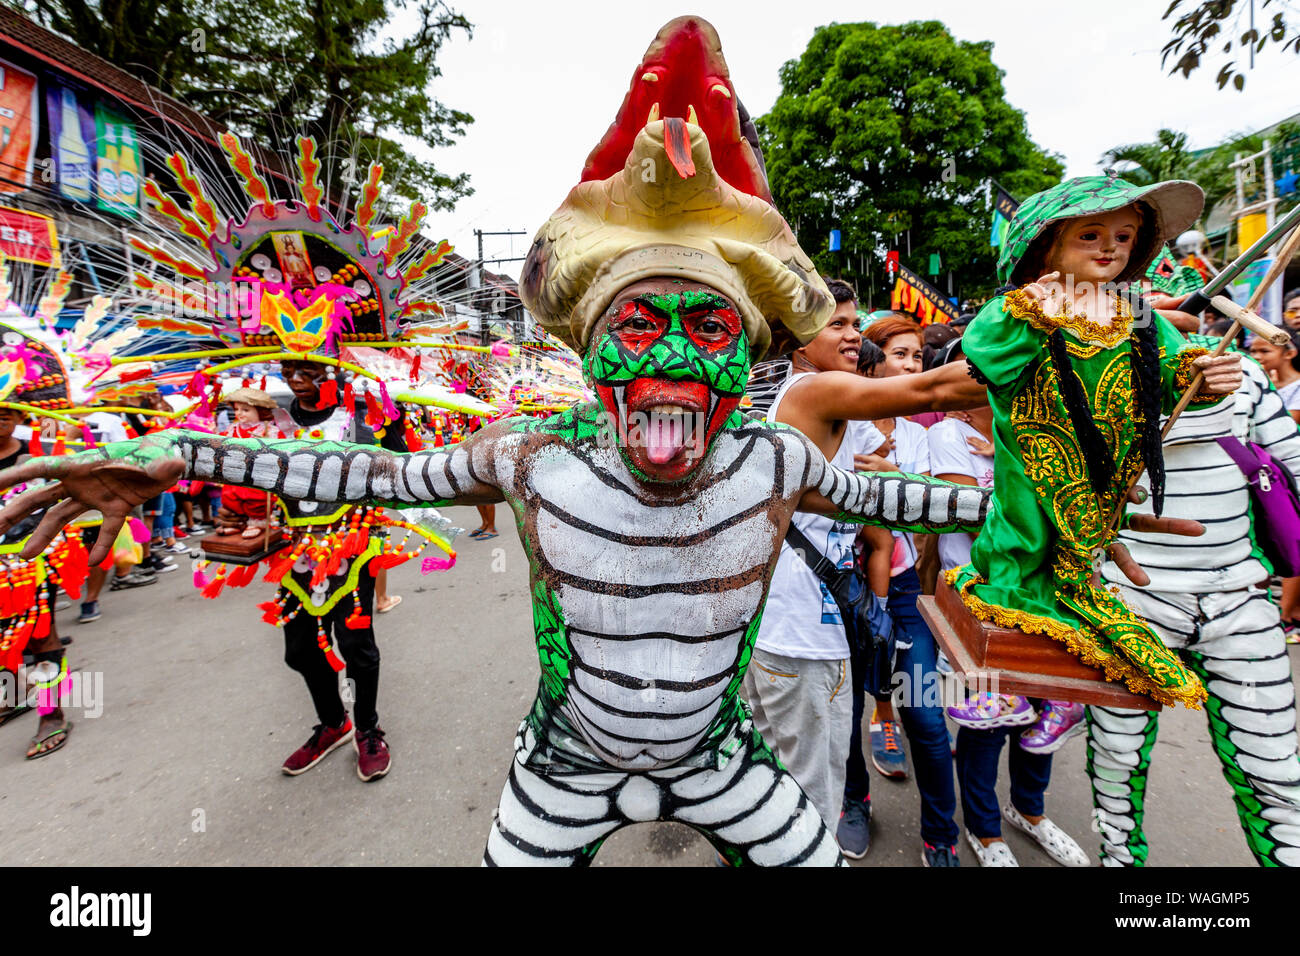 People In Colourful Costumes Holding Santo Nino Statues Parade Through The Streets Of Kalibo During The Ati-Atihan Festival, Kalibo, The Philippines. Stock Photo